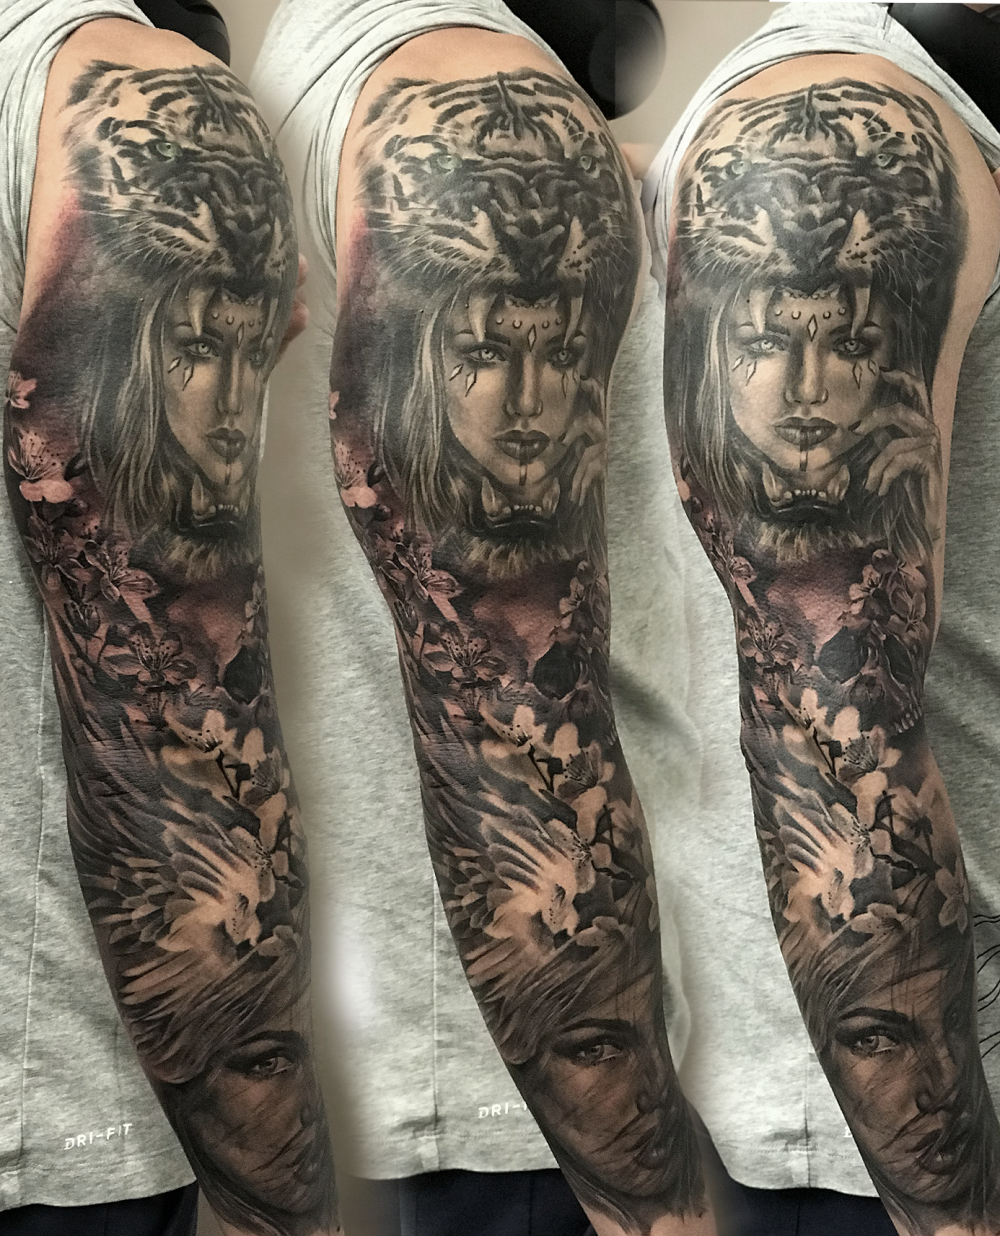 Full sleeve outer part